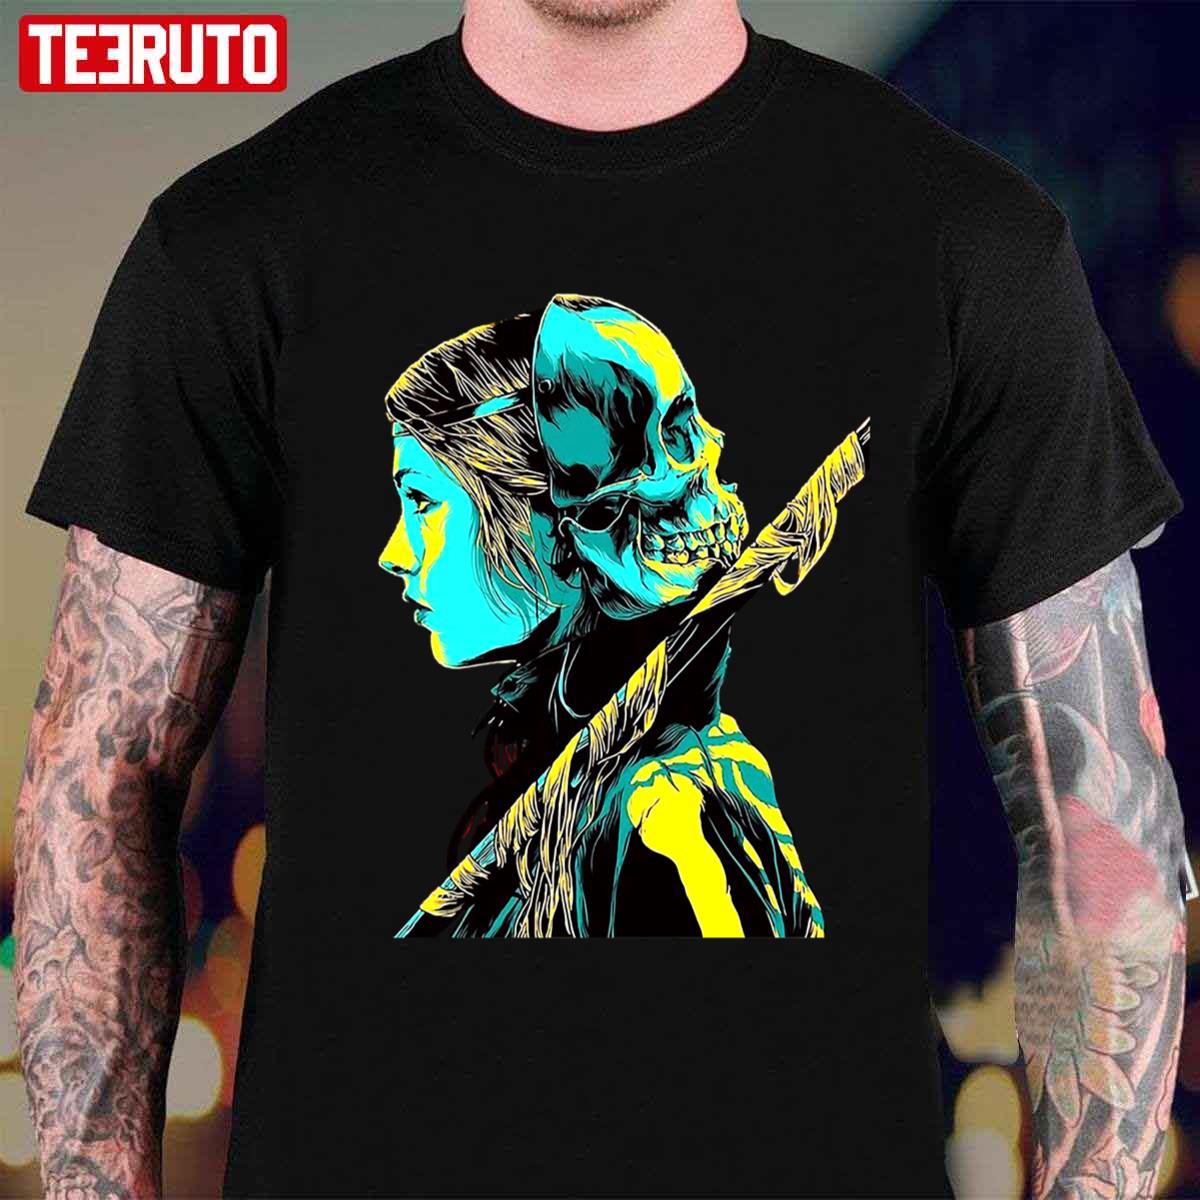 nødsituation omhyggelig Subjektiv Queens Of The Stone Age A Song For The Dead Qotsa Unisex T-shirt - Teeruto